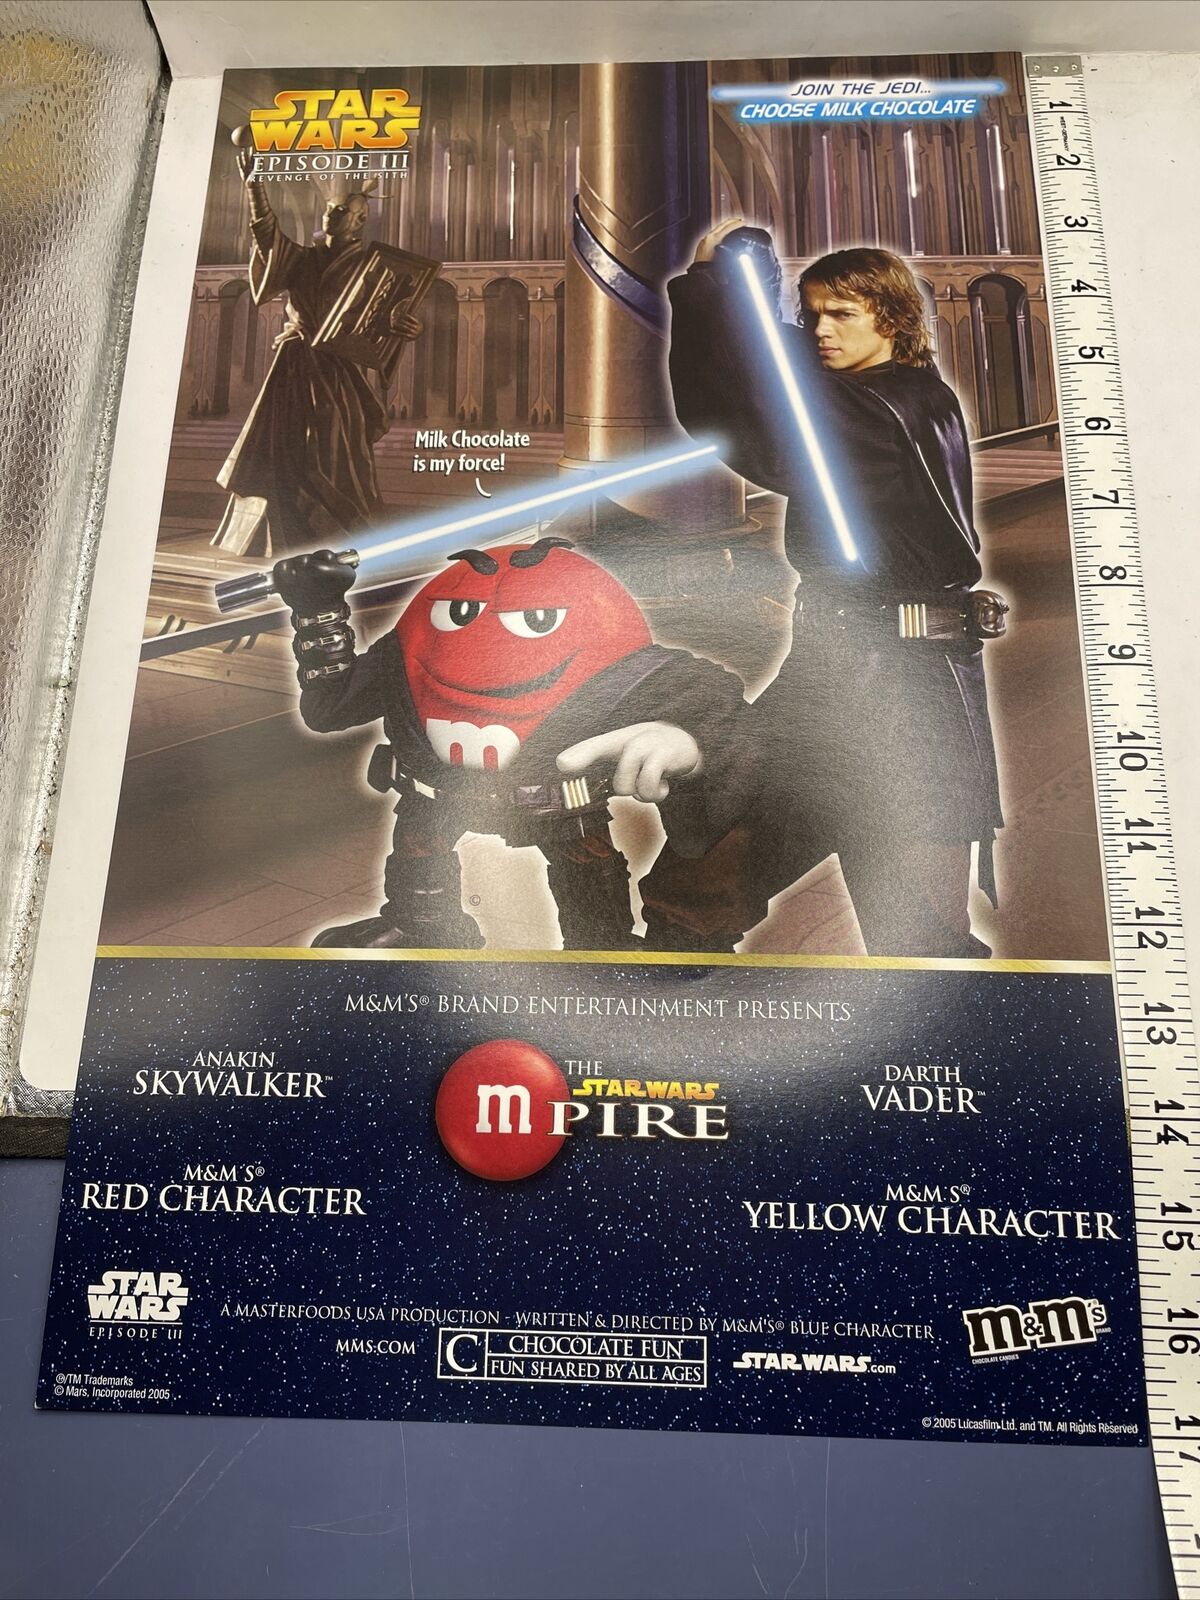 NOS Star Wars M&M’s Revenge of the Sith Promo Poster 2 Sided 2005 17x11” Mpire